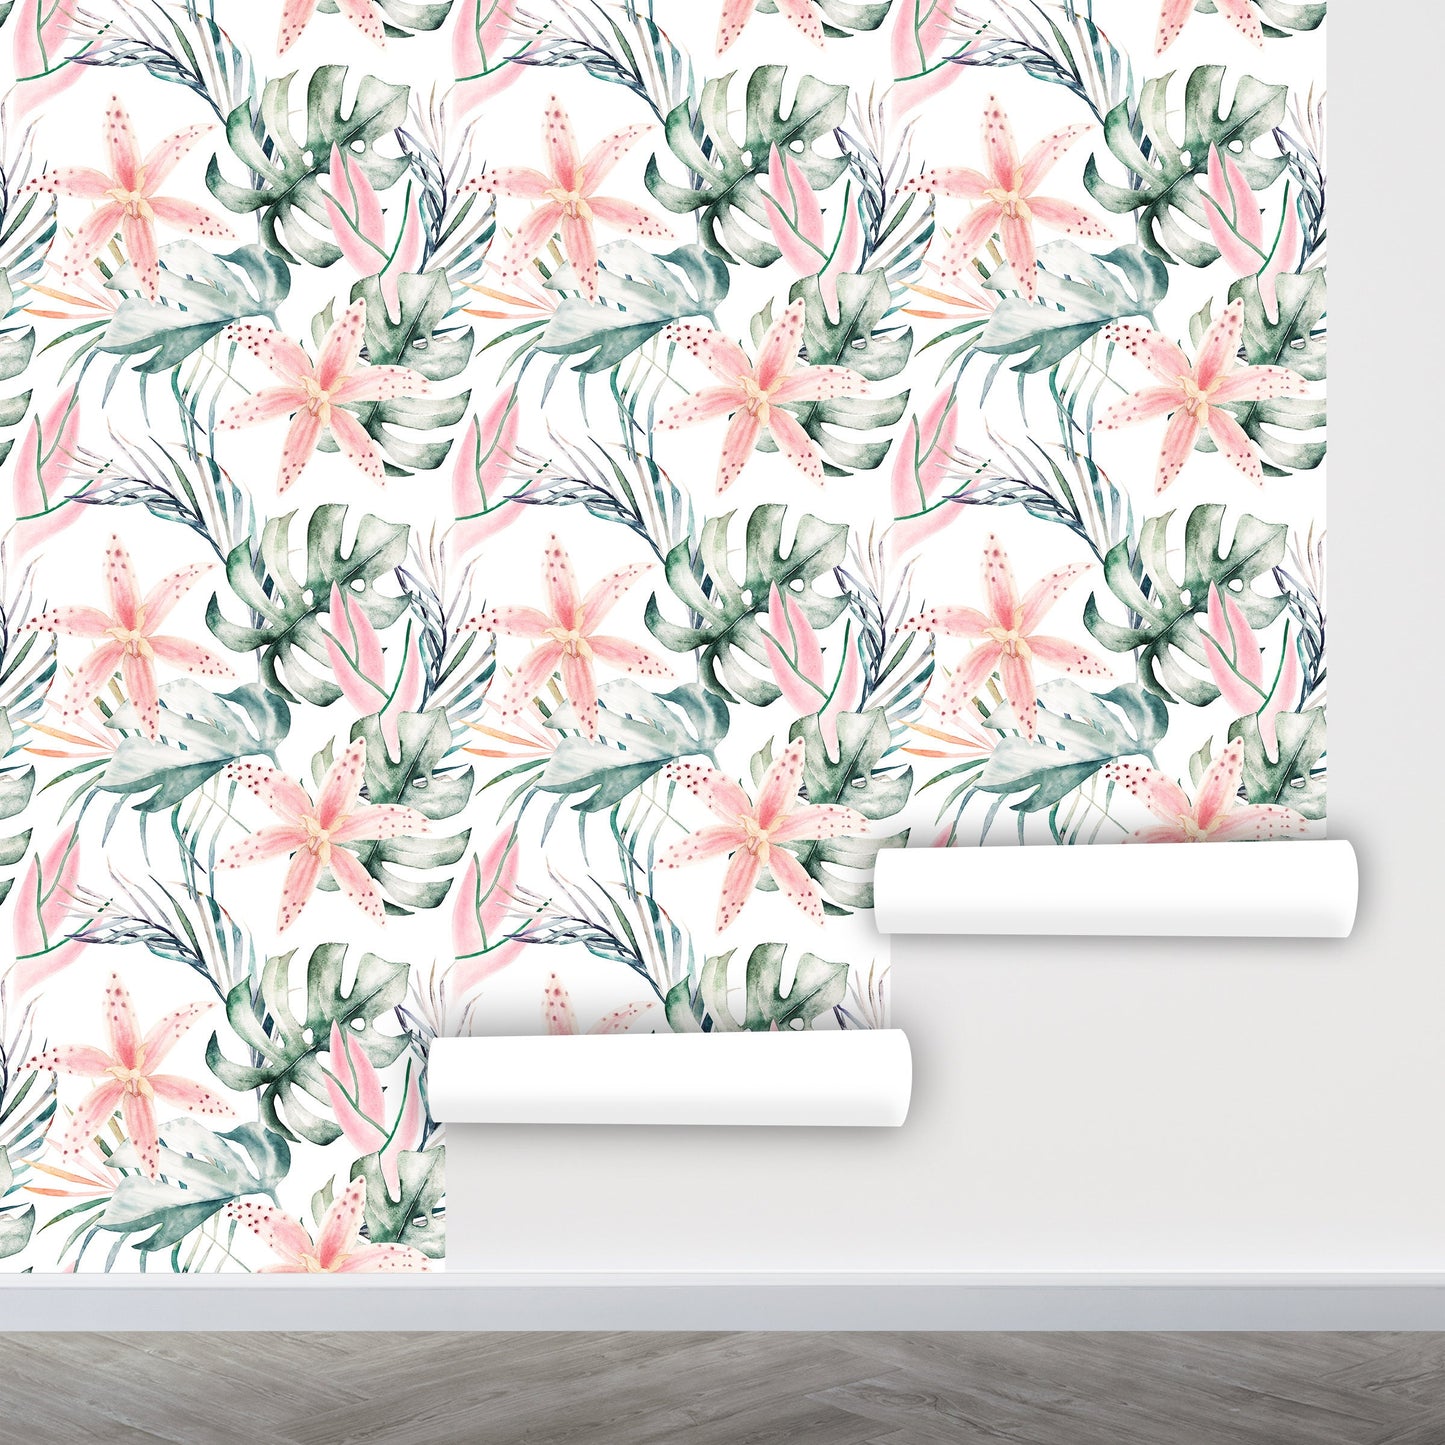 Soft Palm Wallpaper Peel and Stick, Watercolor Wallpaper, Blush Flowers Wallpaper, Tropical Wallpaper, Removable Wall Paper